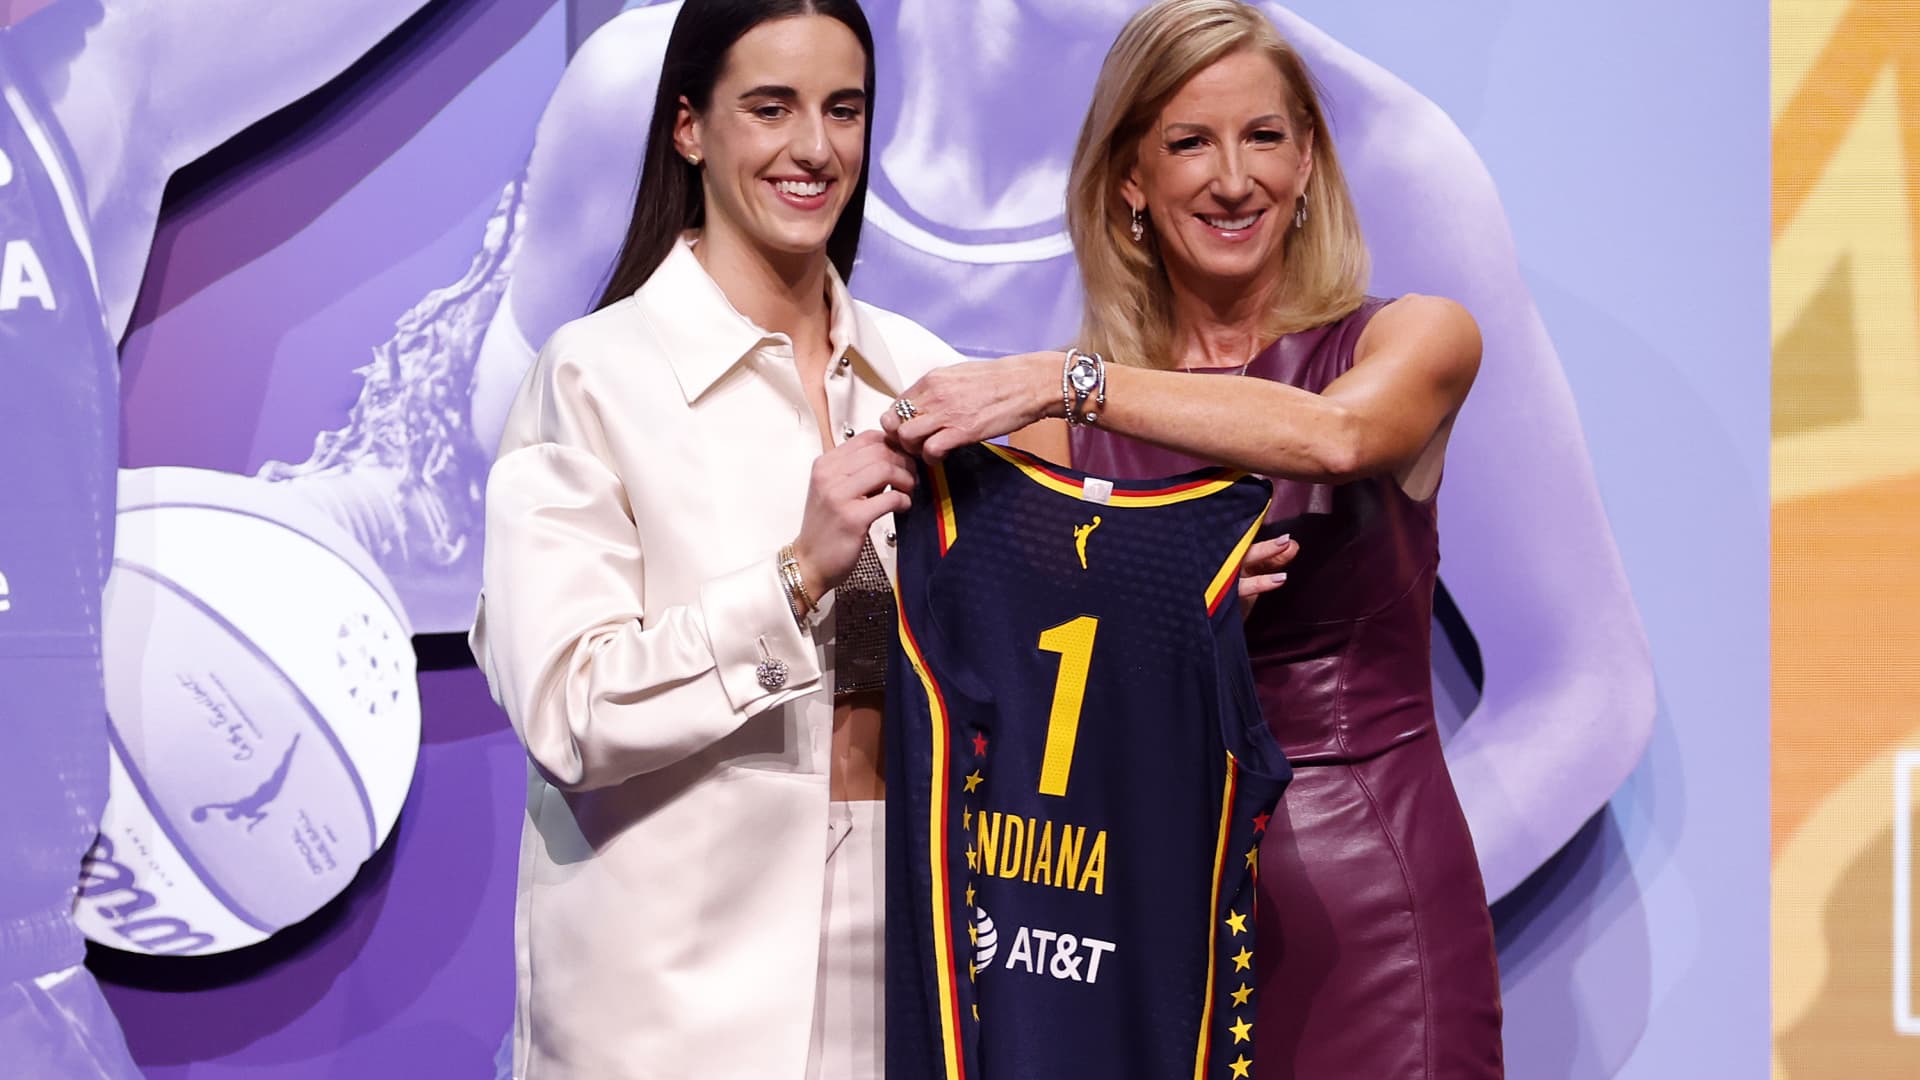 Here's how Caitlin Clark's $338,000 WNBA contract compares to No. 1 picks from the NFL, NBA and MLB